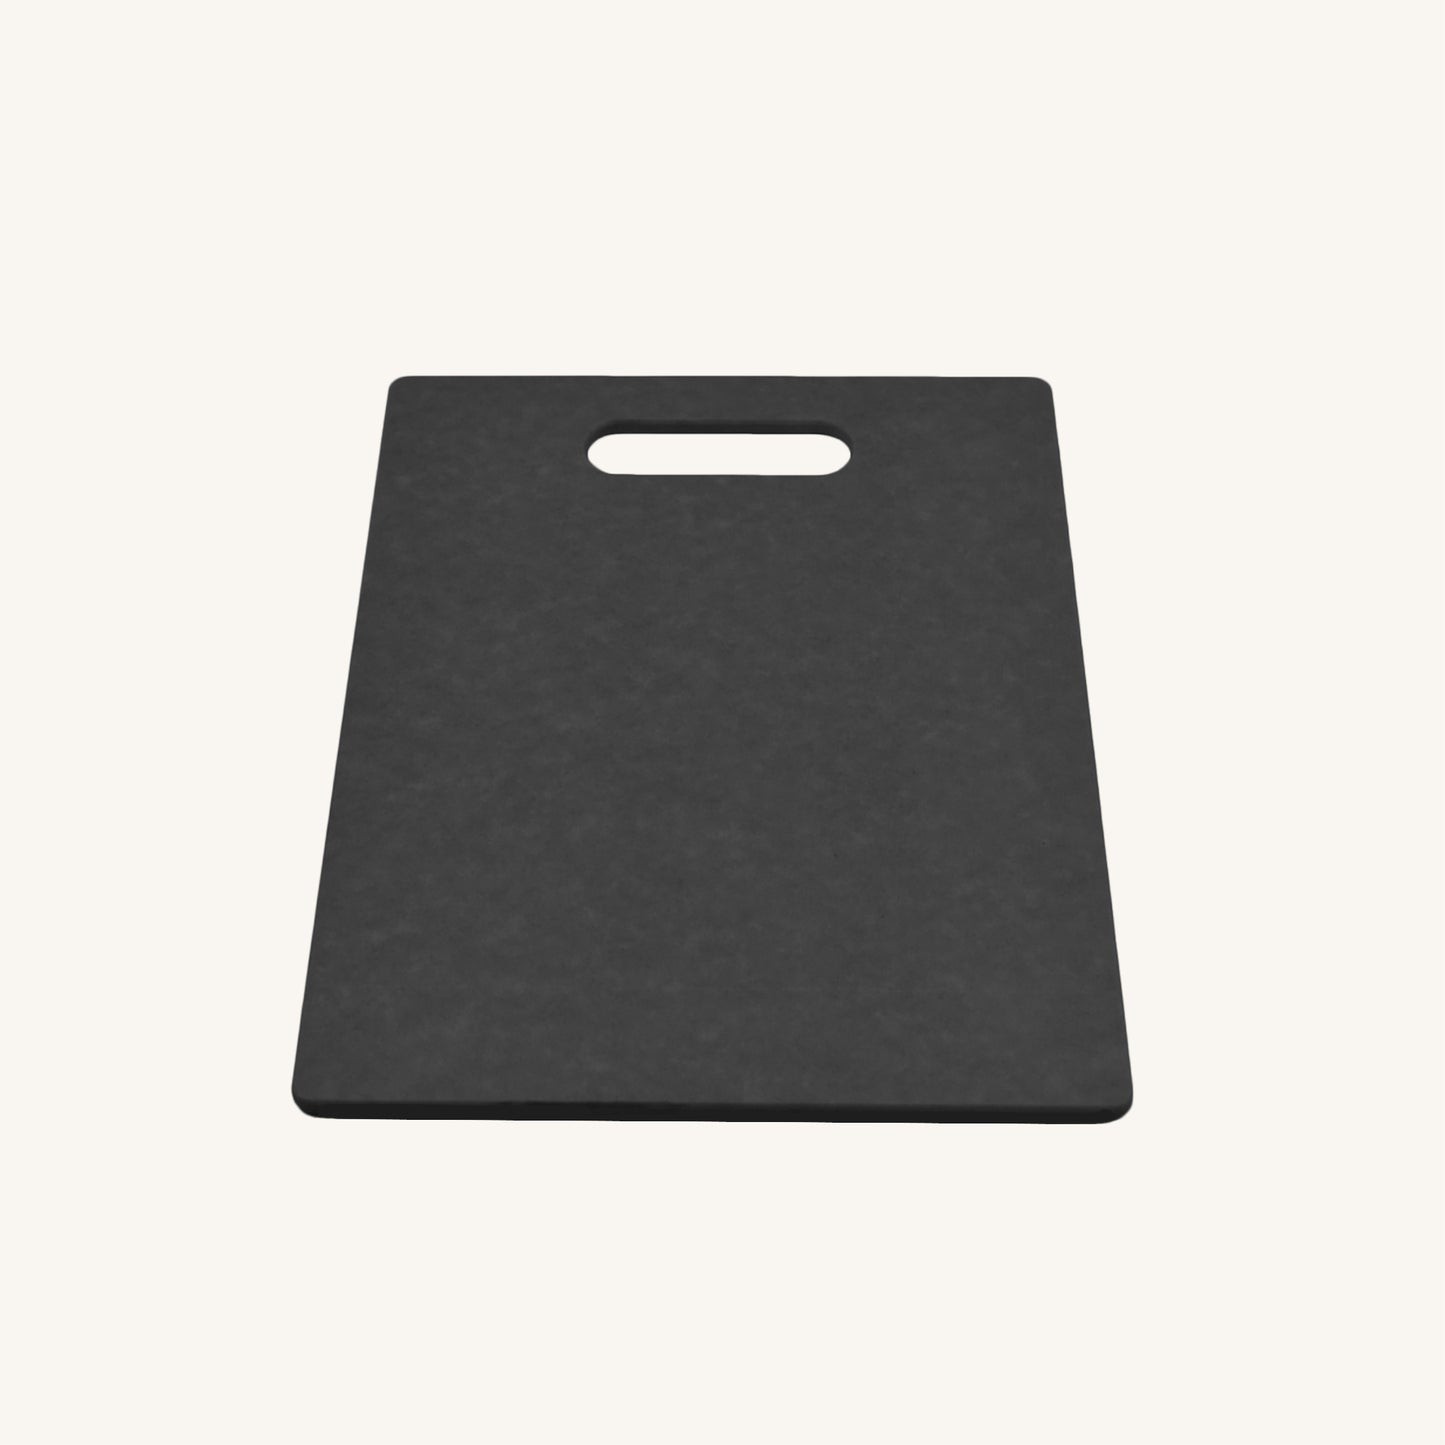 Dishwasher Safe Small Handle Cutting Board with Rounded Corner & Edges